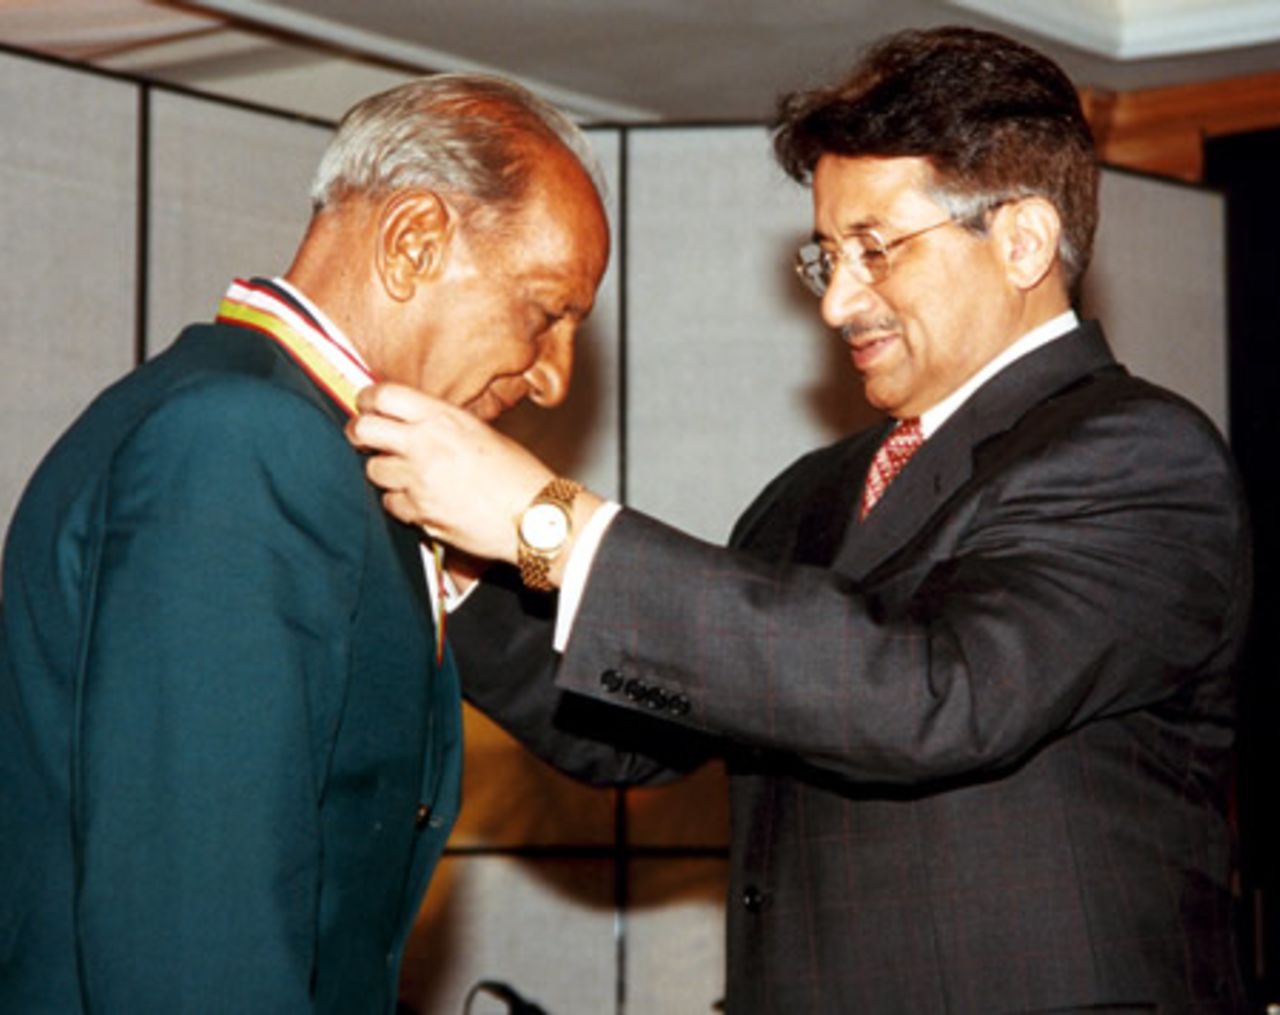 Israr Ali receiving his medal from Pakistan president during the Golden Jubilee of Test Cricket Gala, Islamabad, September 16, 2003.